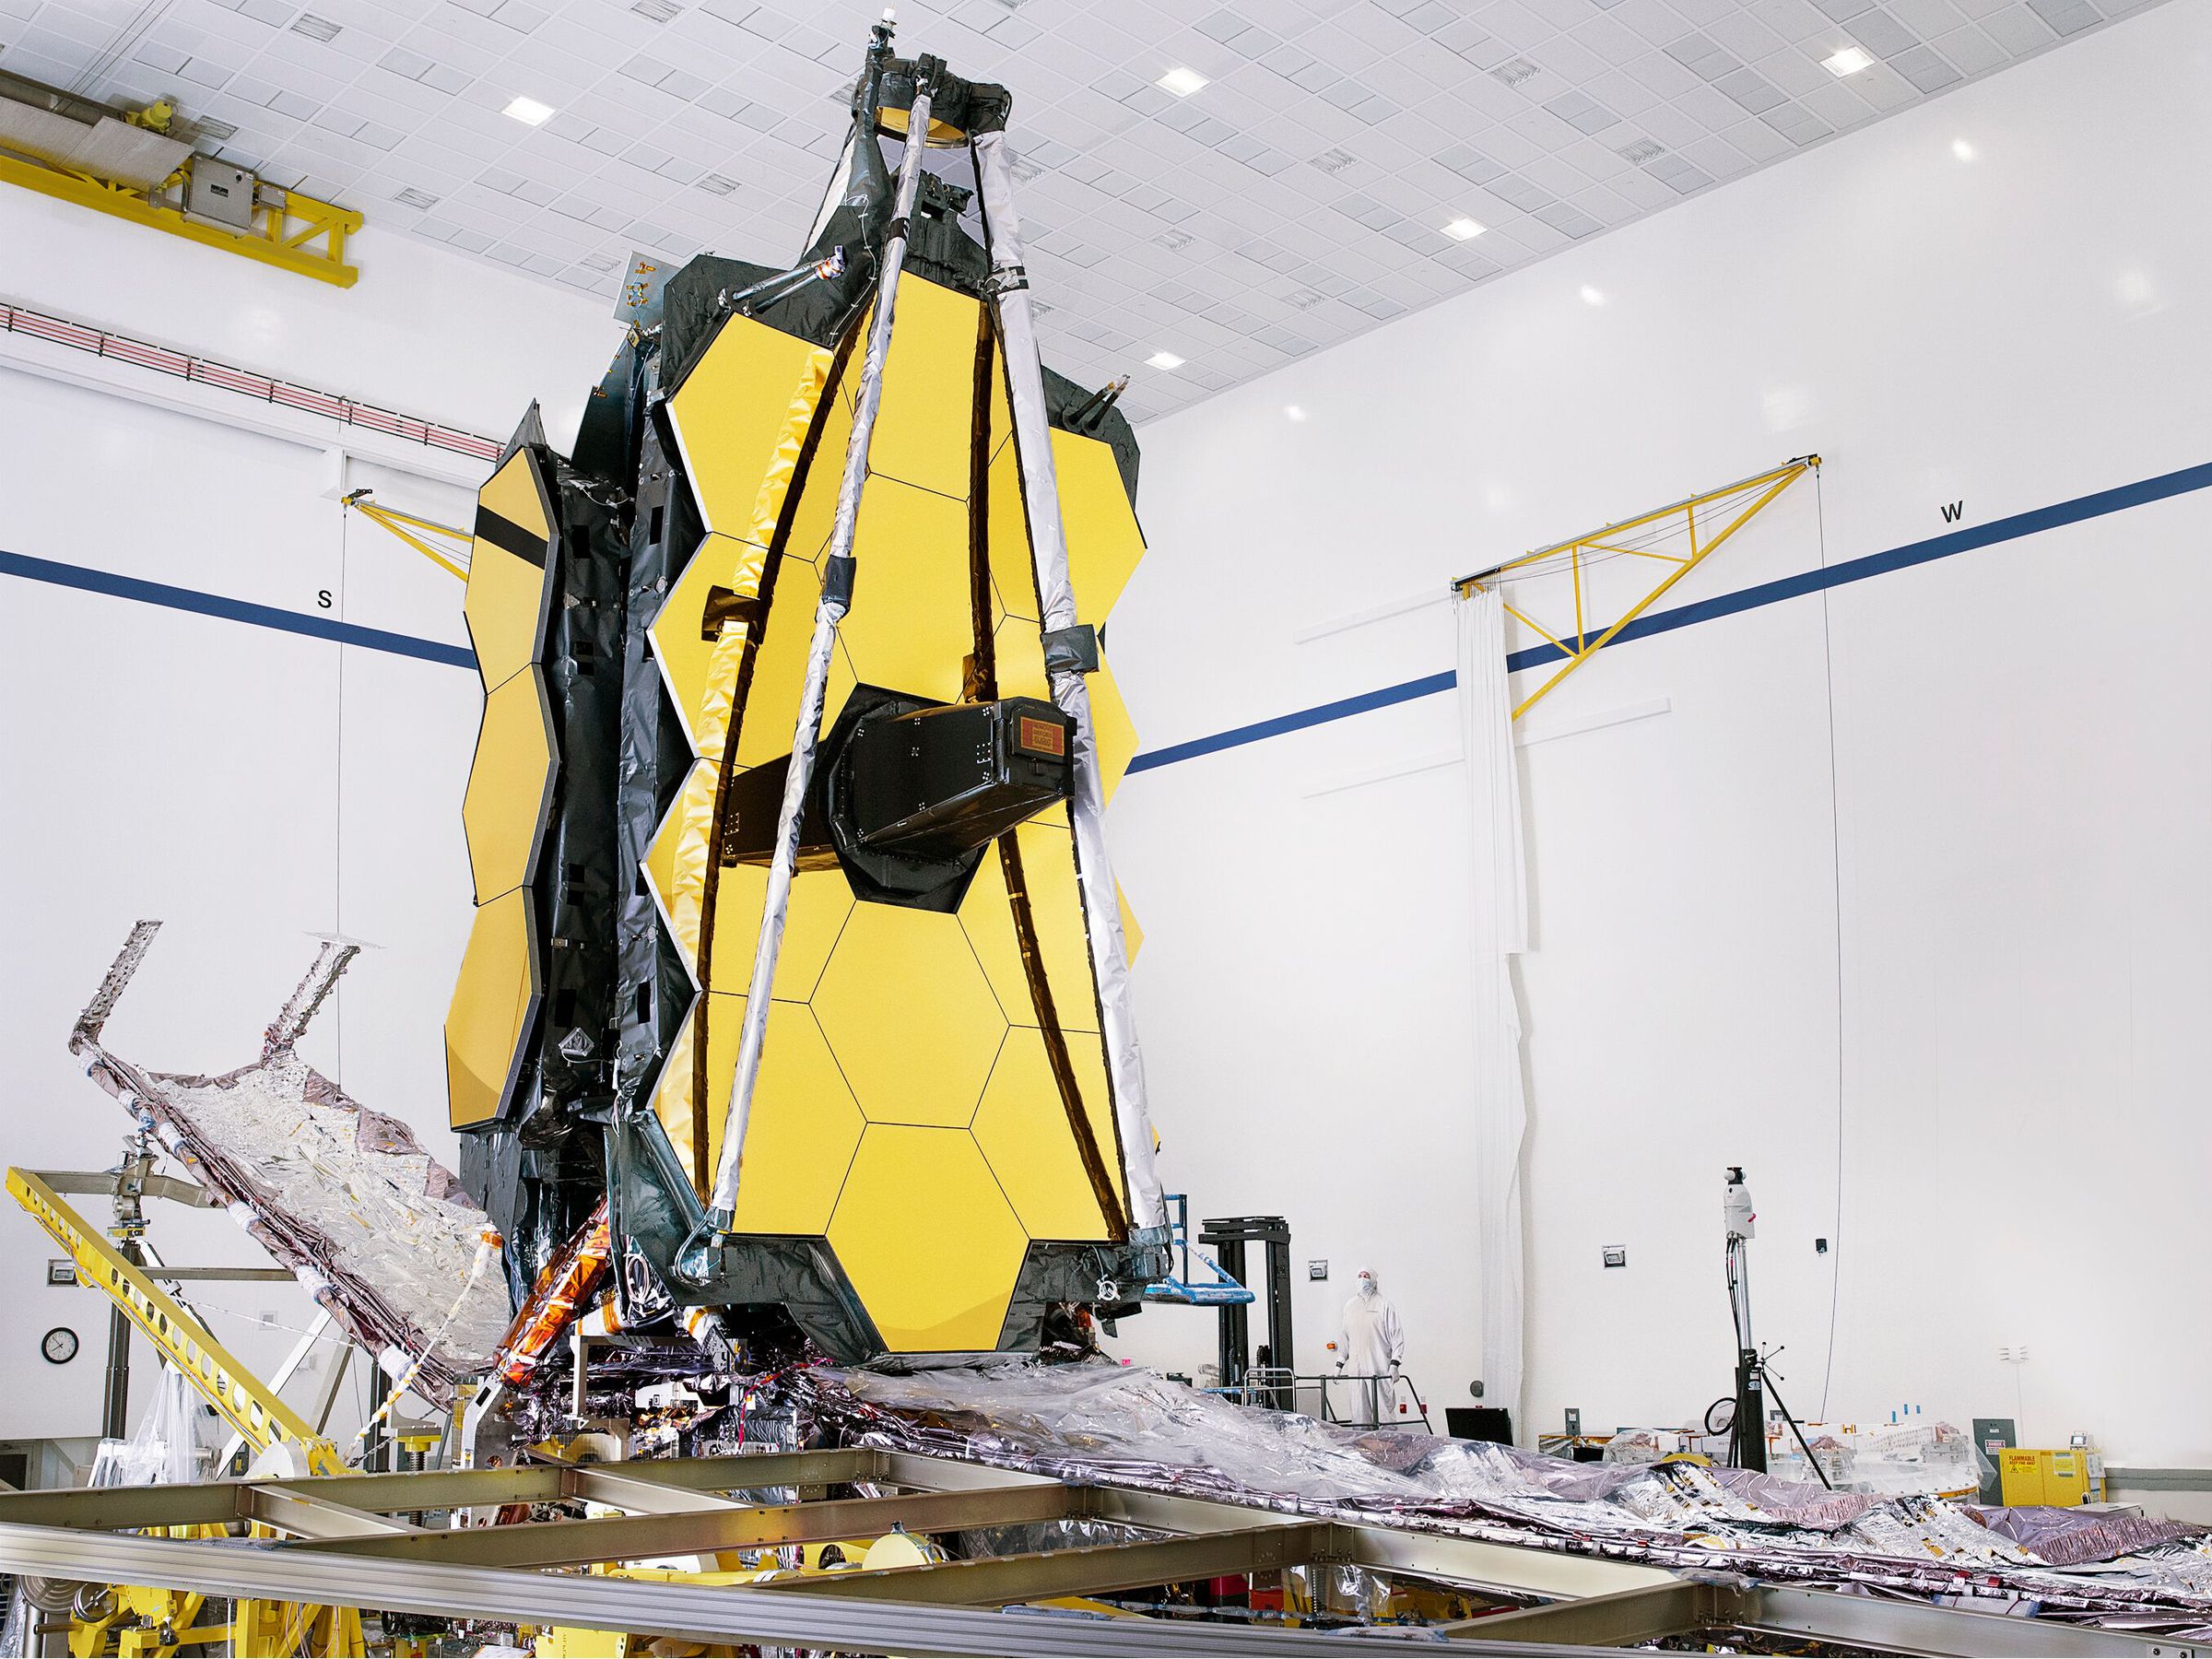 NASA’s JWST spacecraft, ahead of its launch this December